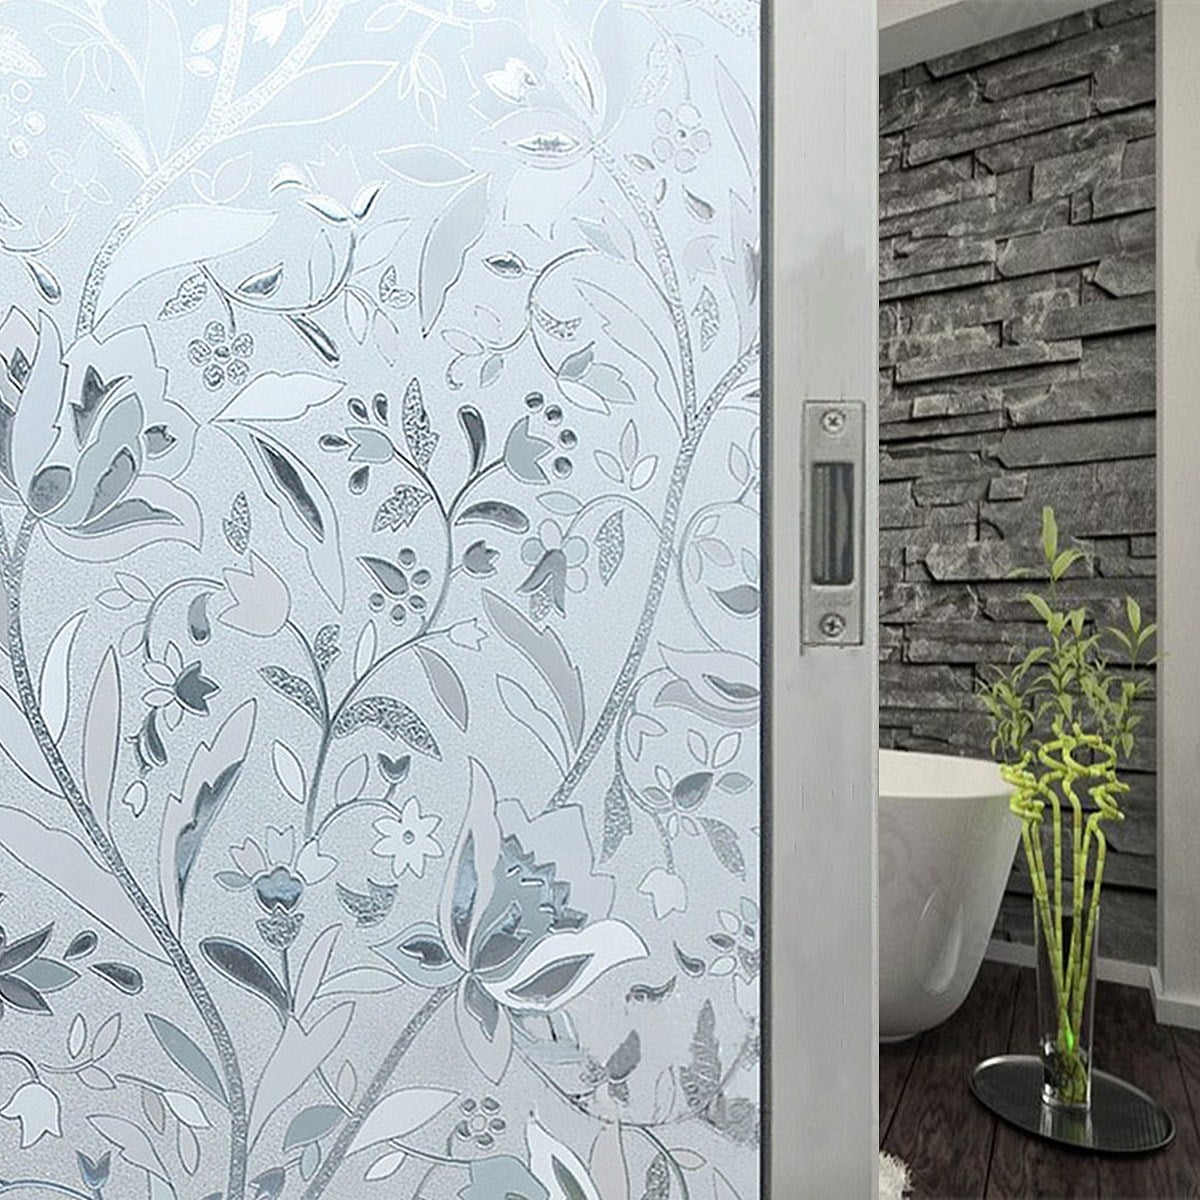 Waterproof PVC Privacy Frosted Sticker Glass Home Bedroom Bathroom Window Film 